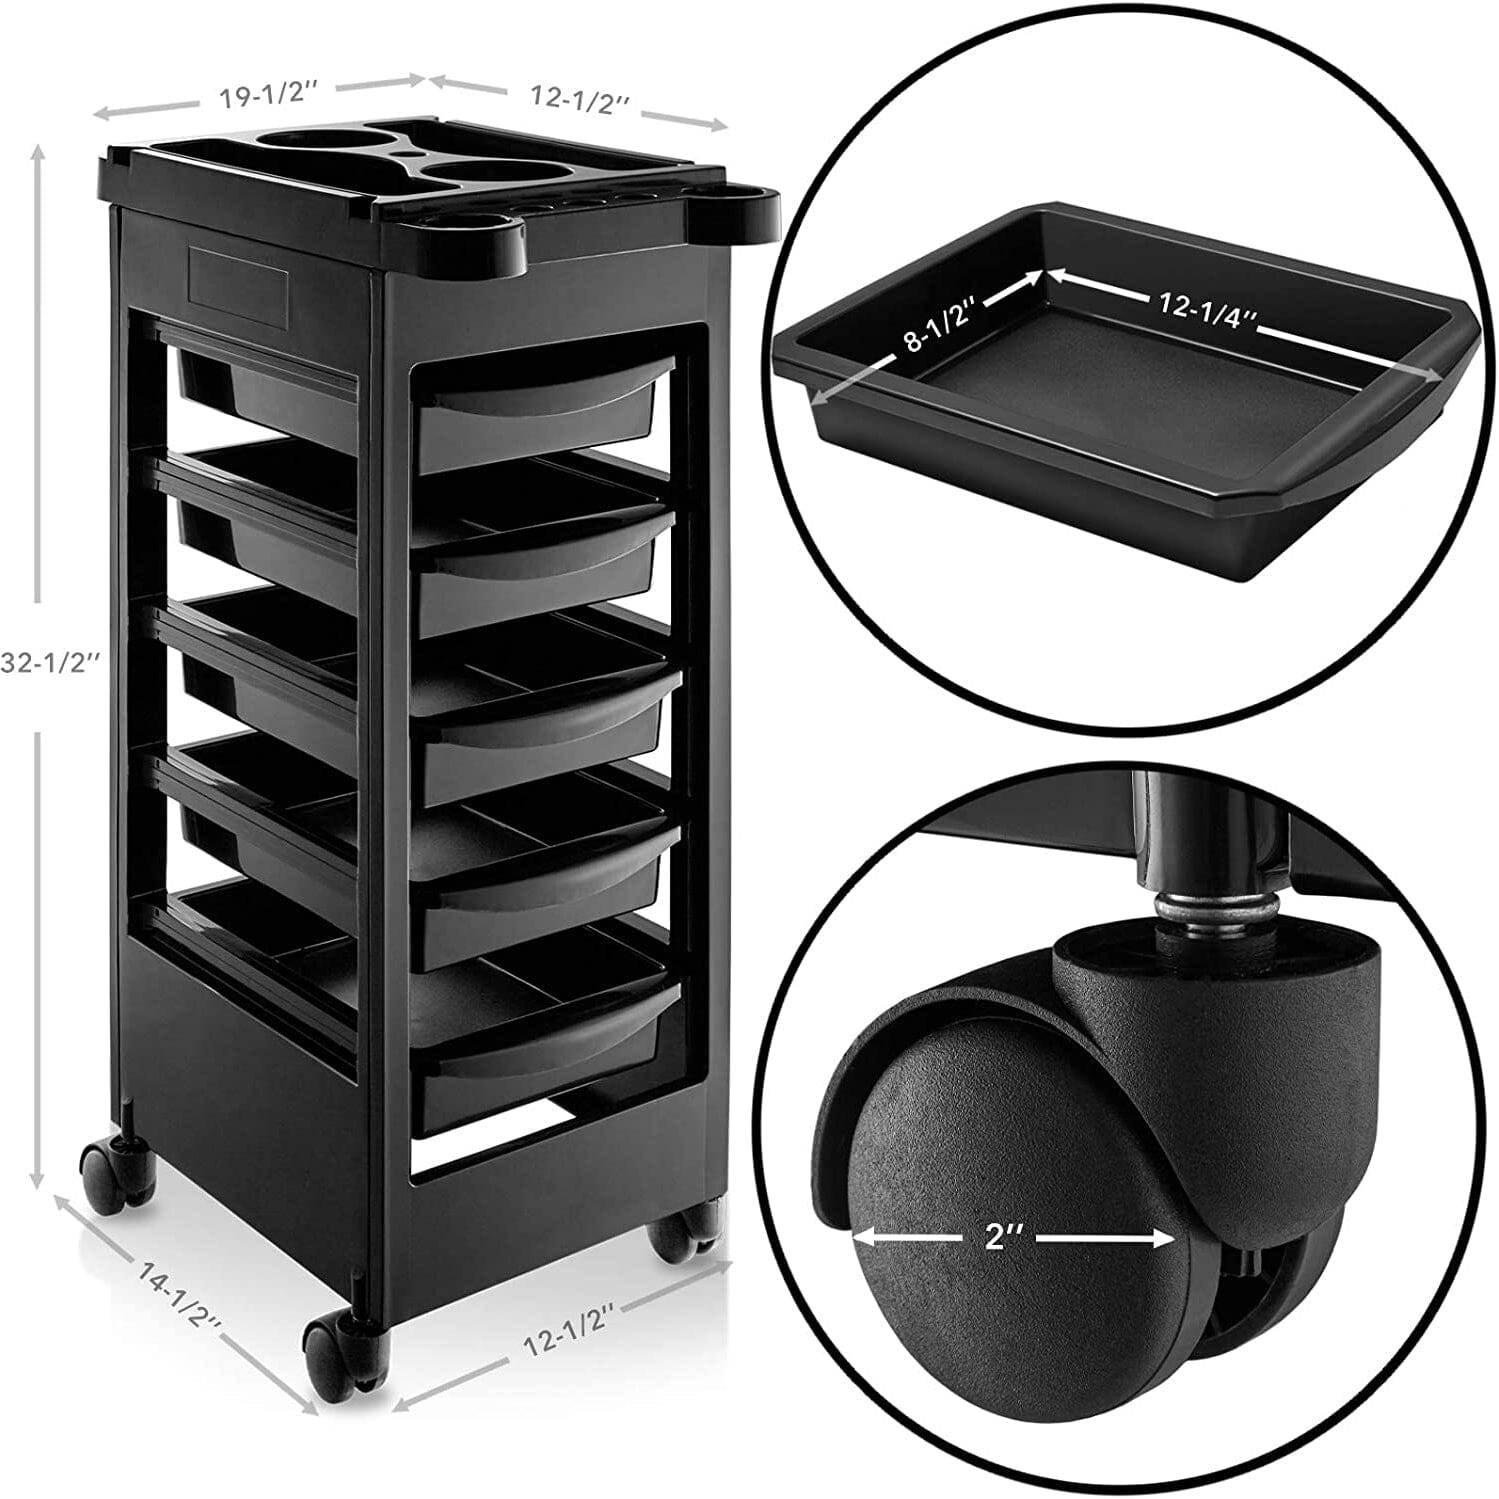 DK-38015 | Trolley Cart with 5 Drawers - SH Salons